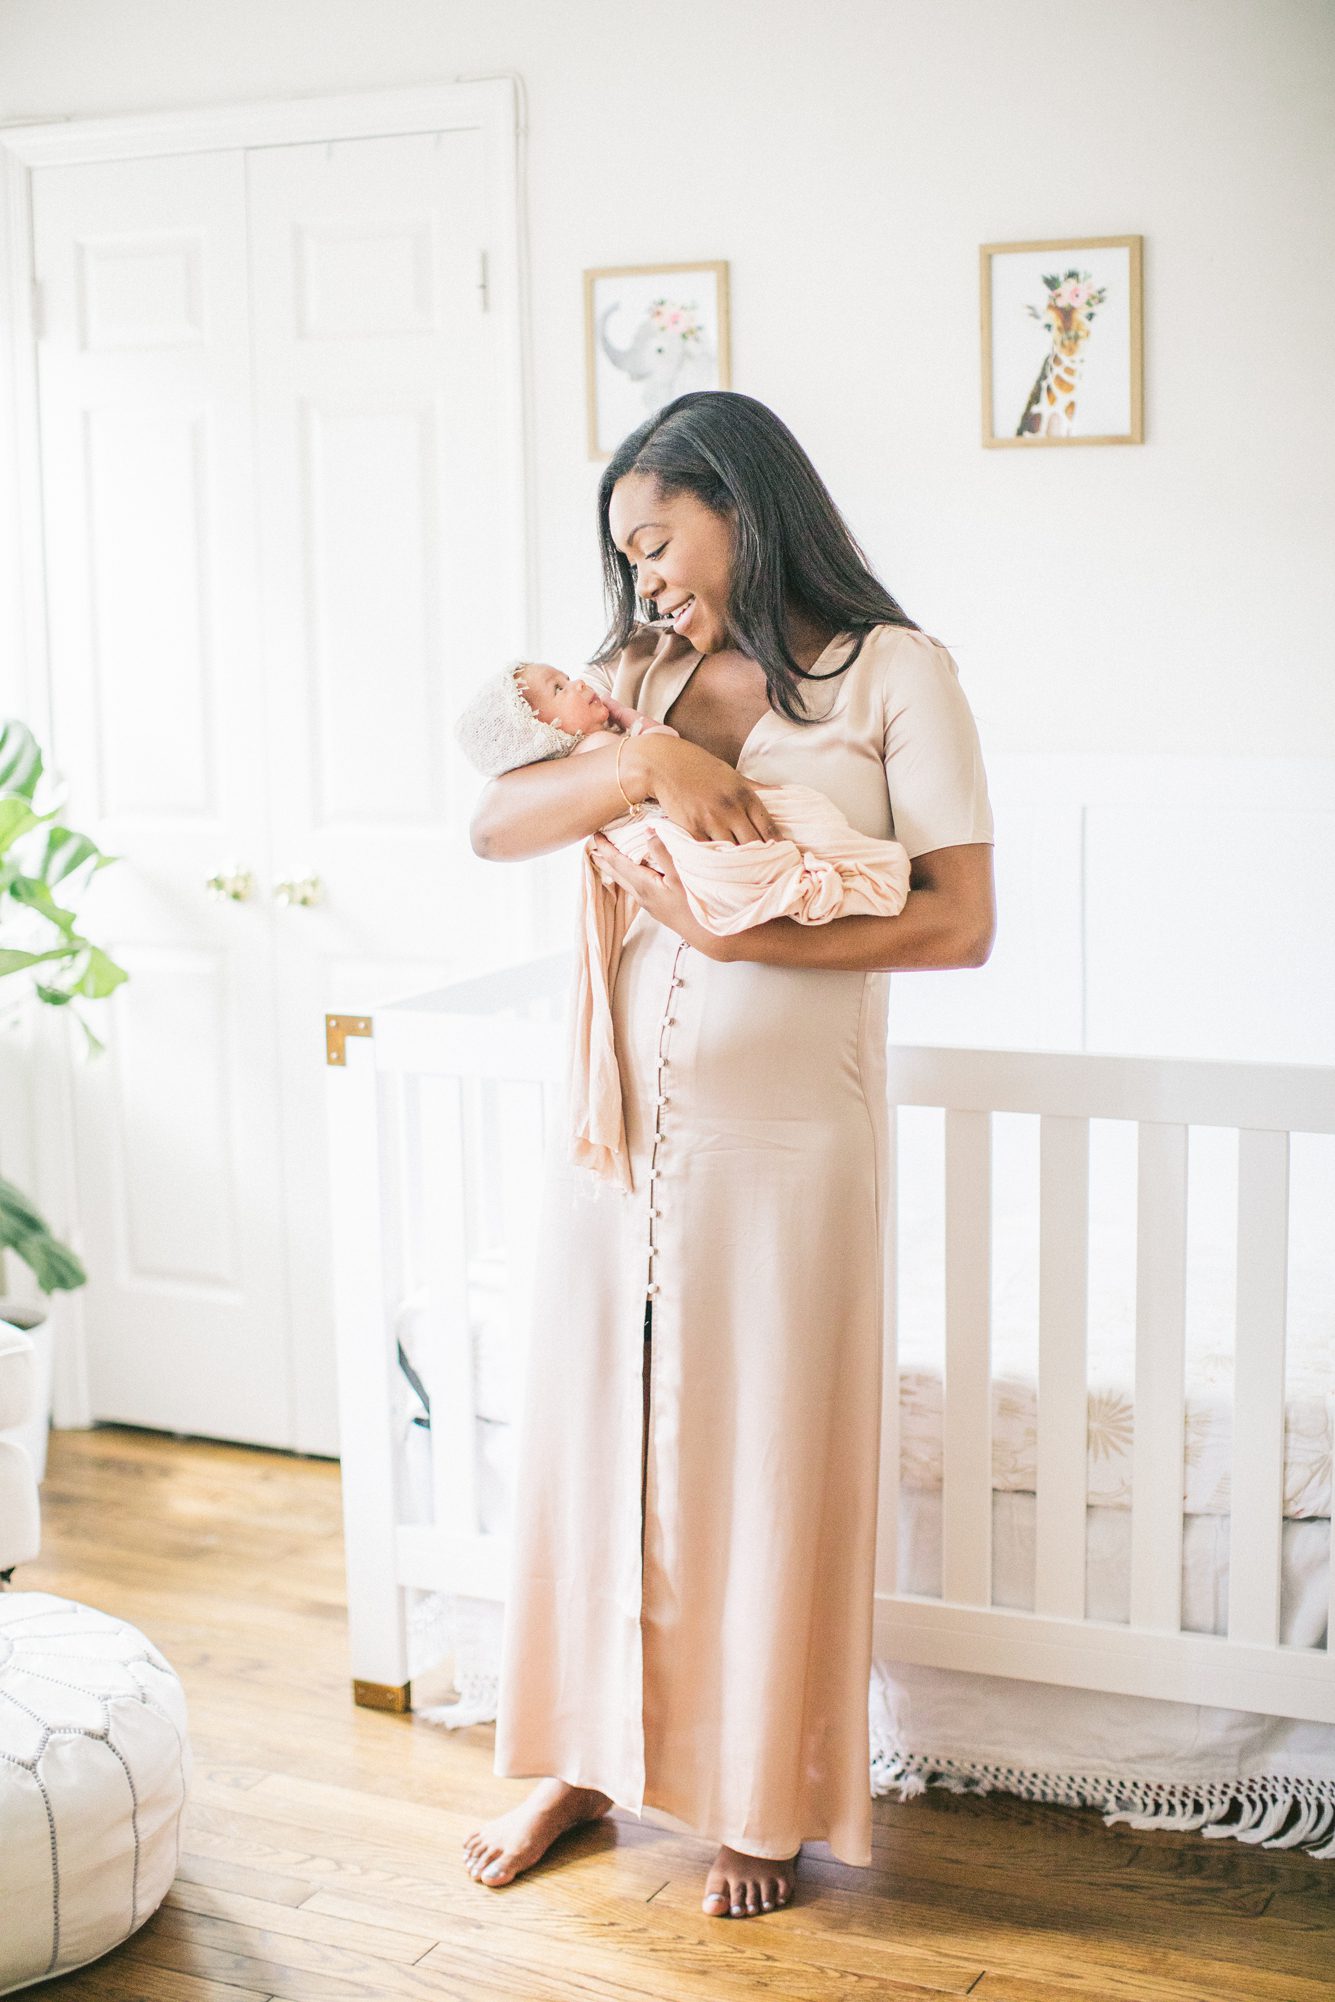 Mom wearing blush maxi dress looking down at baby in her arms during lifestyle newborn session in Washington DC.Photo by LRG Portraits.